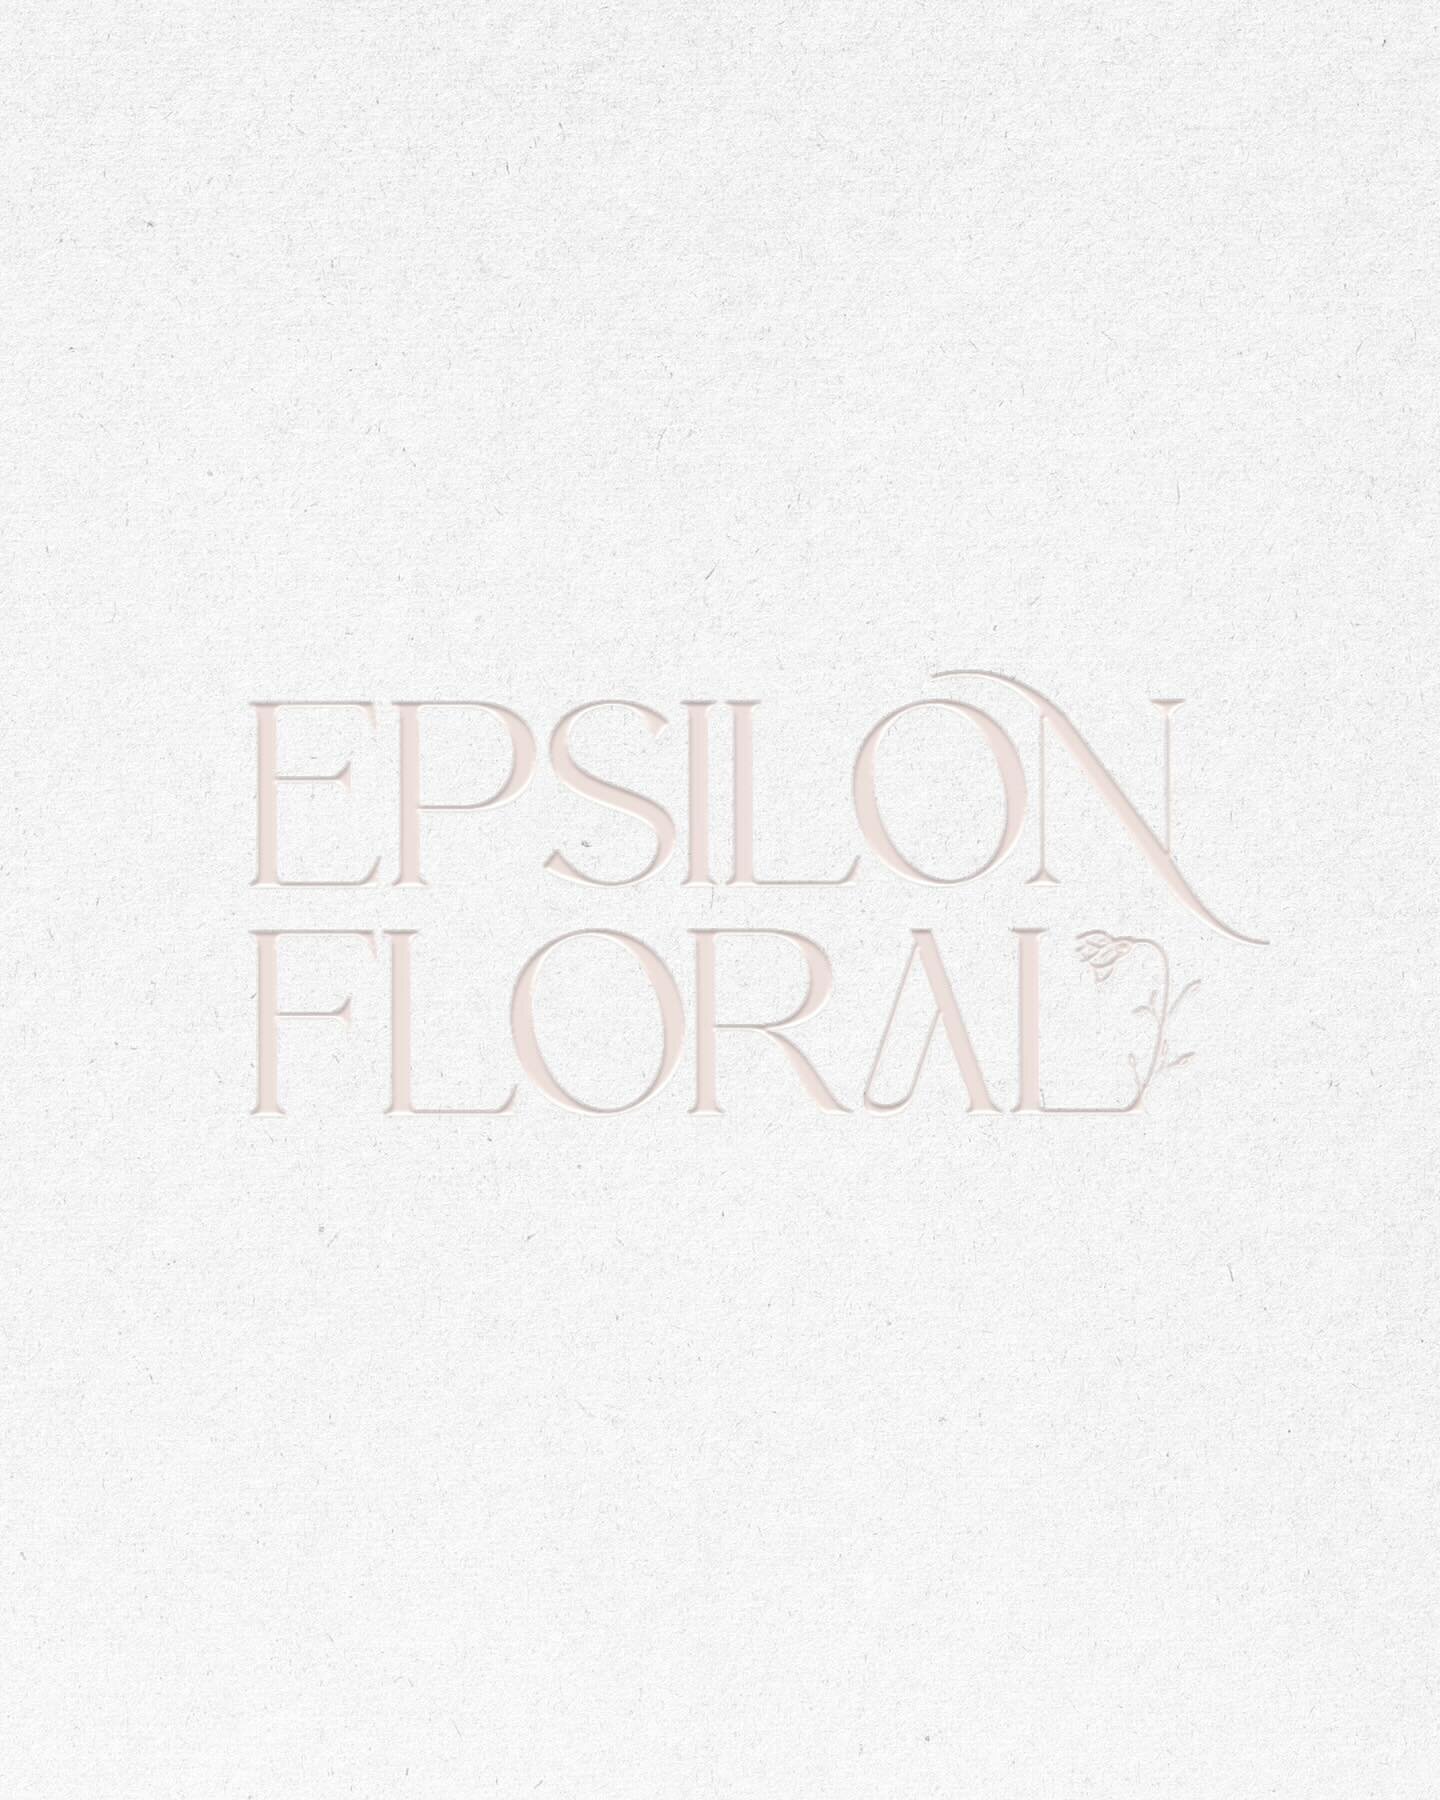 Just a sweet logo moment with @epsilonfloral for your feed today 🩷✨

I love the challenge of capturing a brand&rsquo;s essence in a logo suite and bringing the feel of your brand ALIVE! 

If you have been looking for a rebrand for your business that